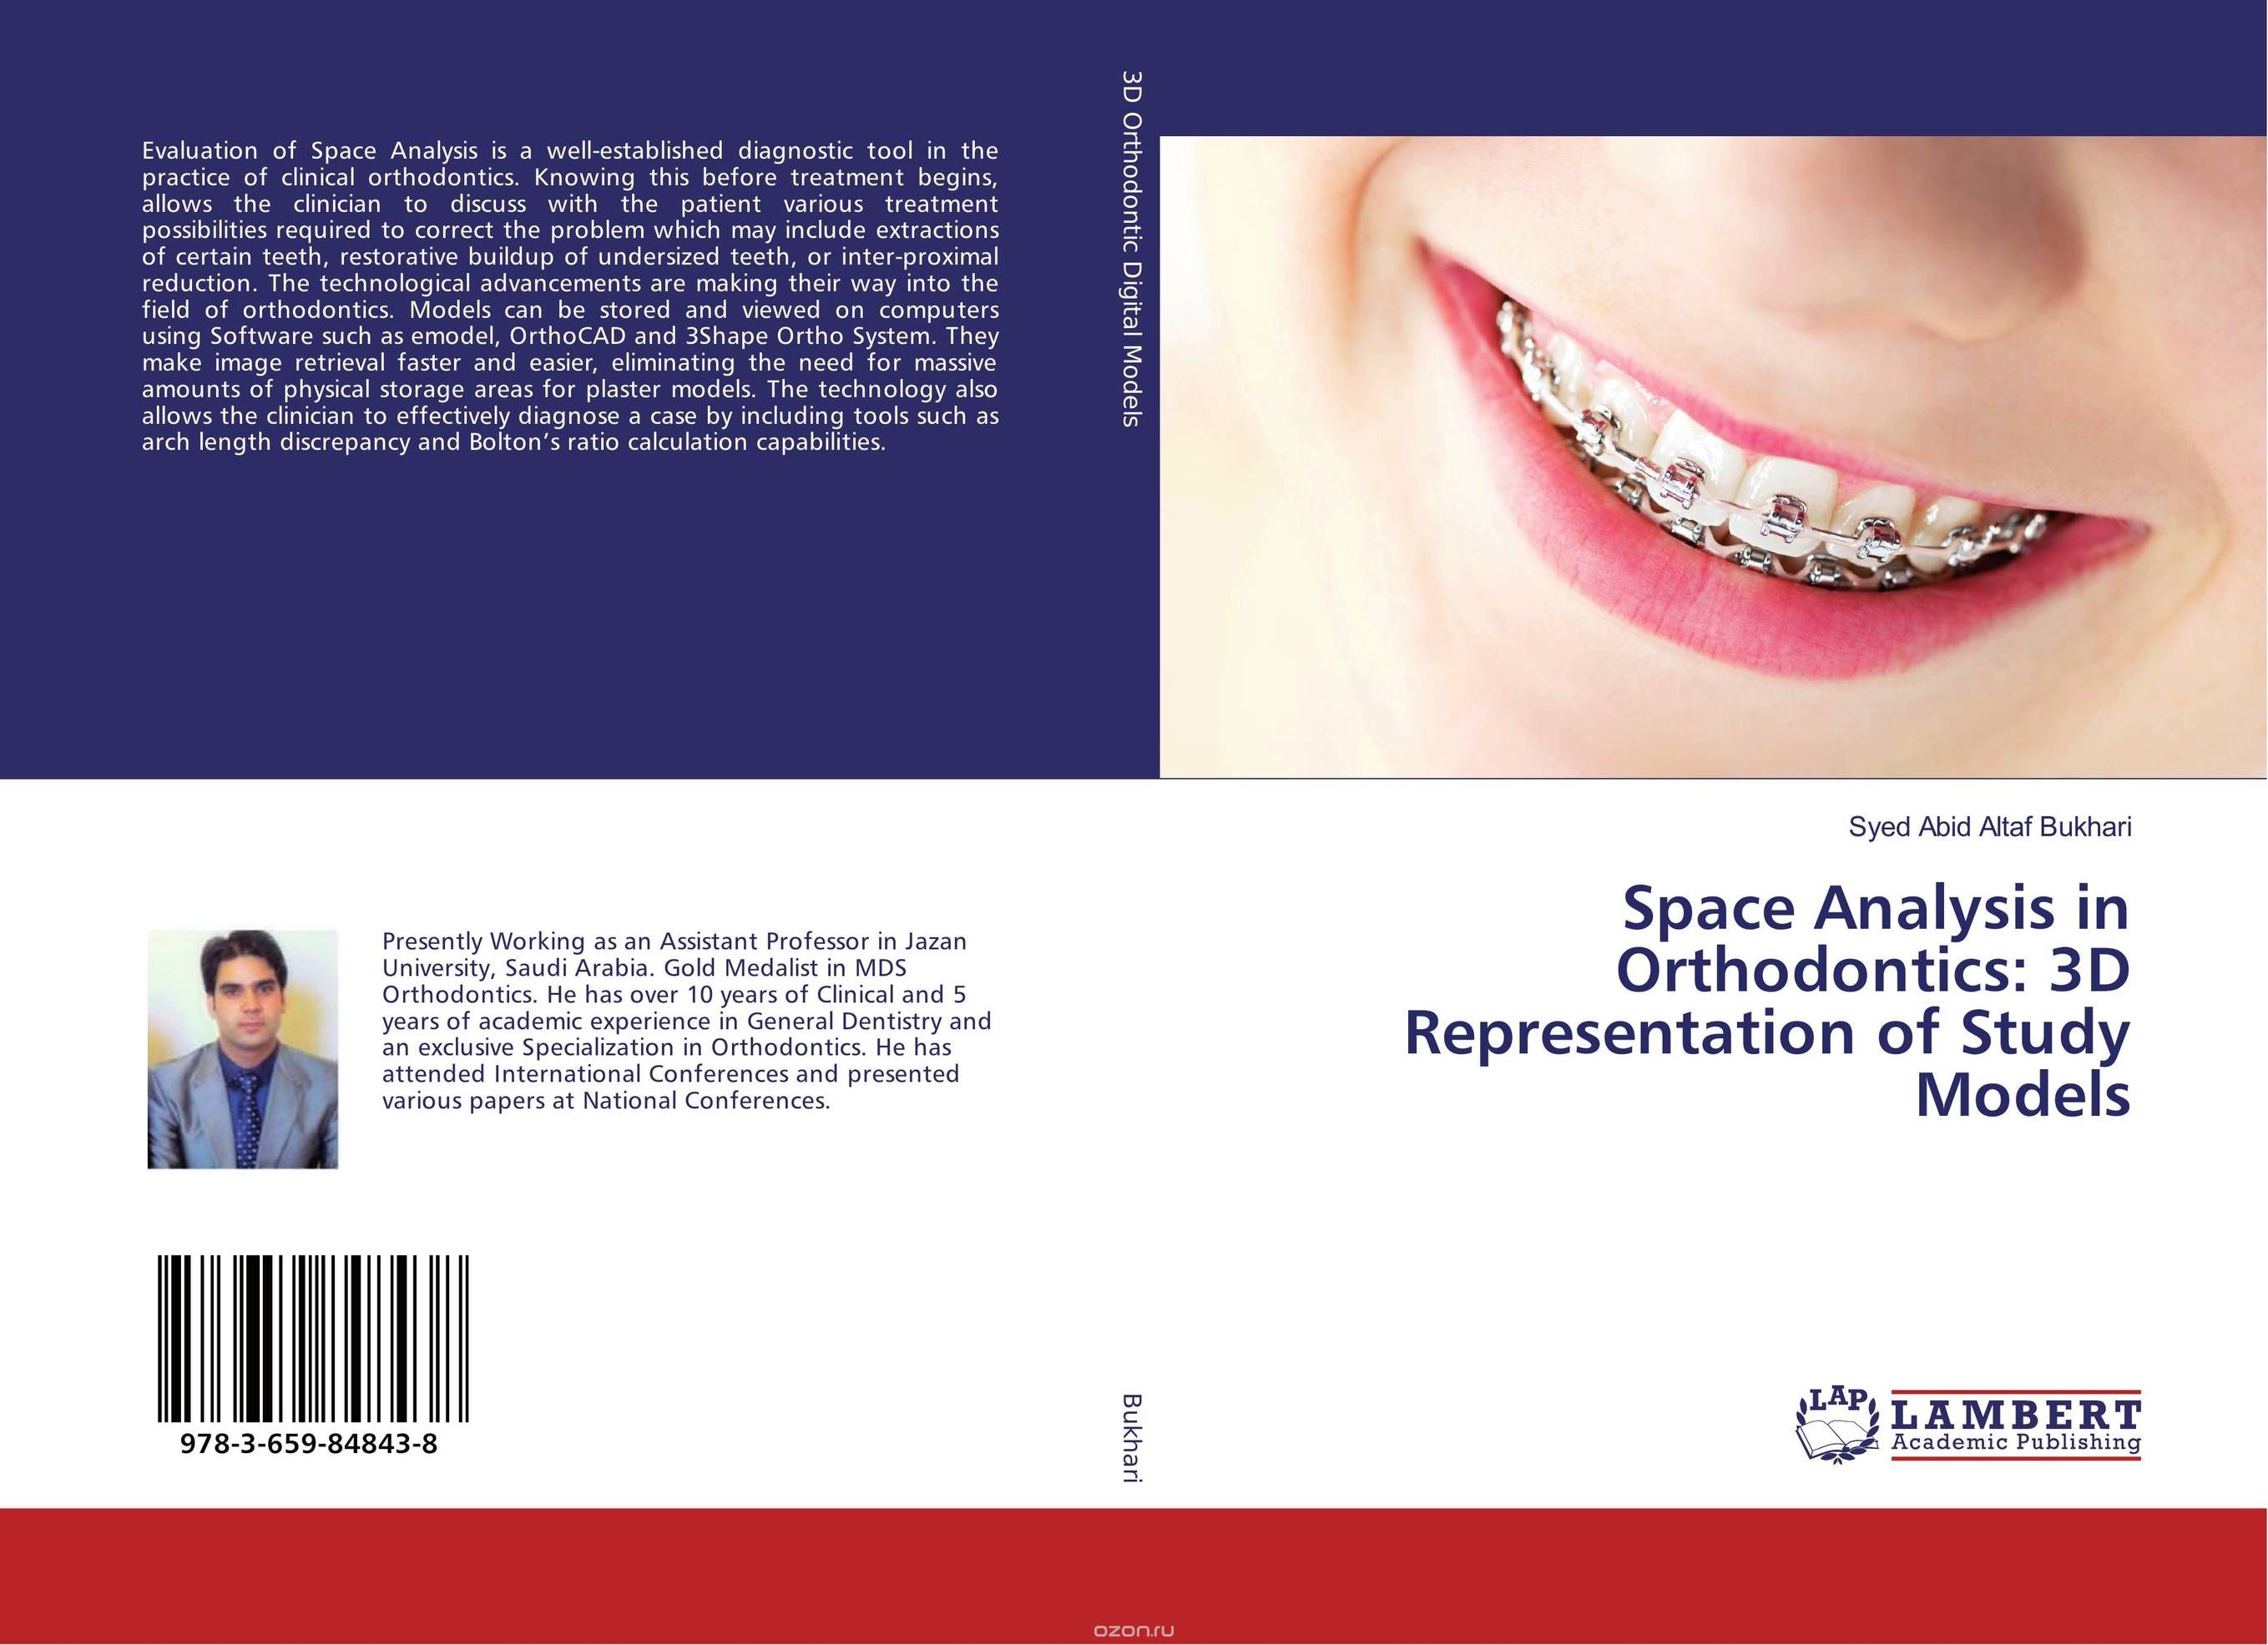 Space Analysis in Orthodontics: 3D Representation of Study Models